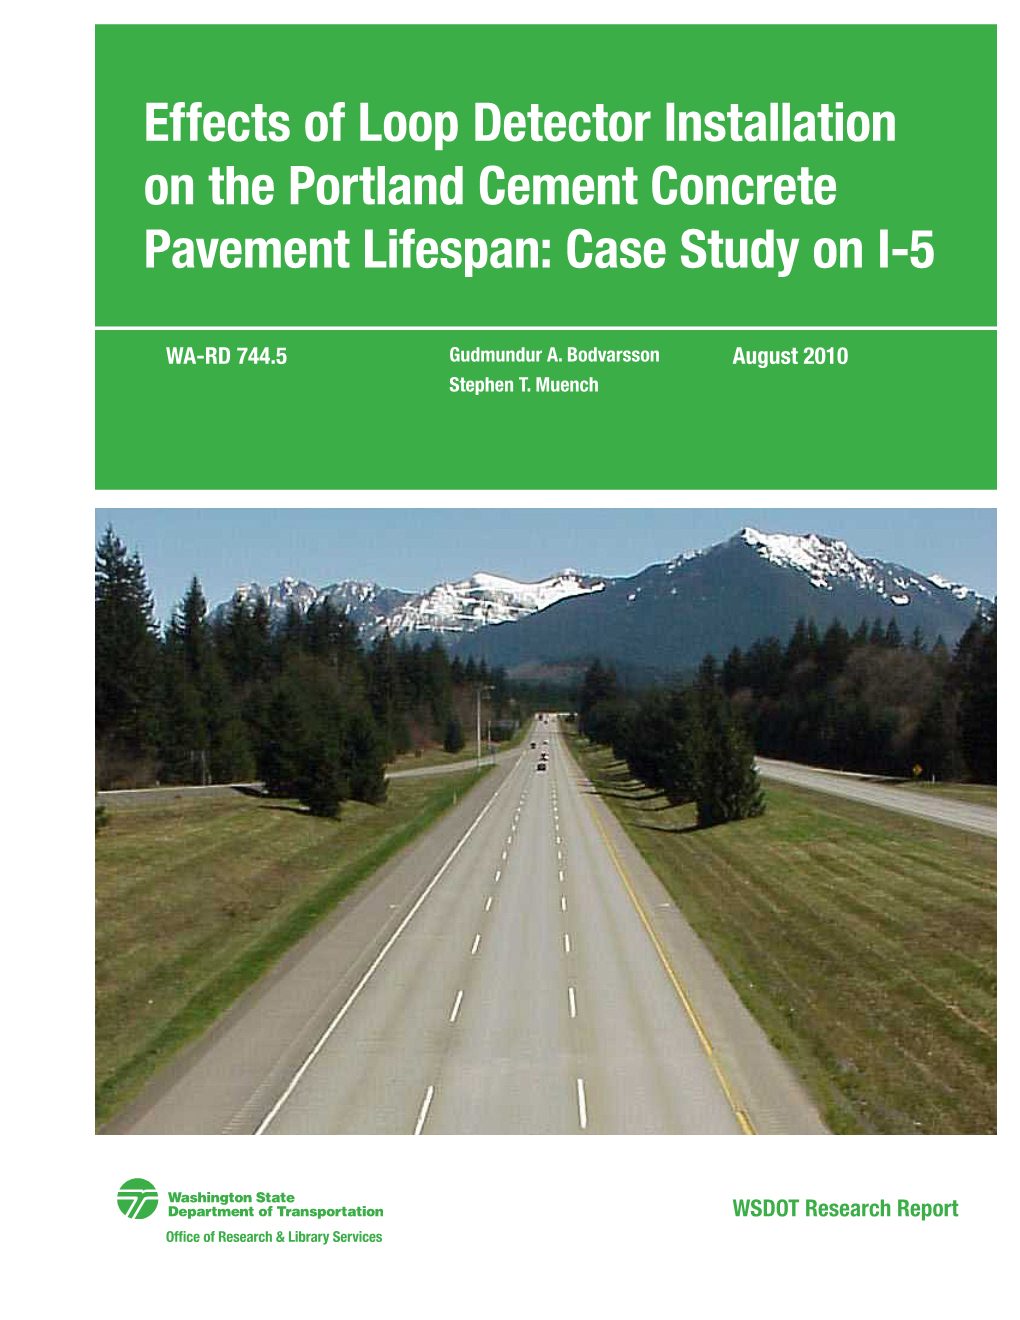 Effects of Loop Detector Installation on the Portland Cement Concrete Pavement Lifespan: Case Study on I-5